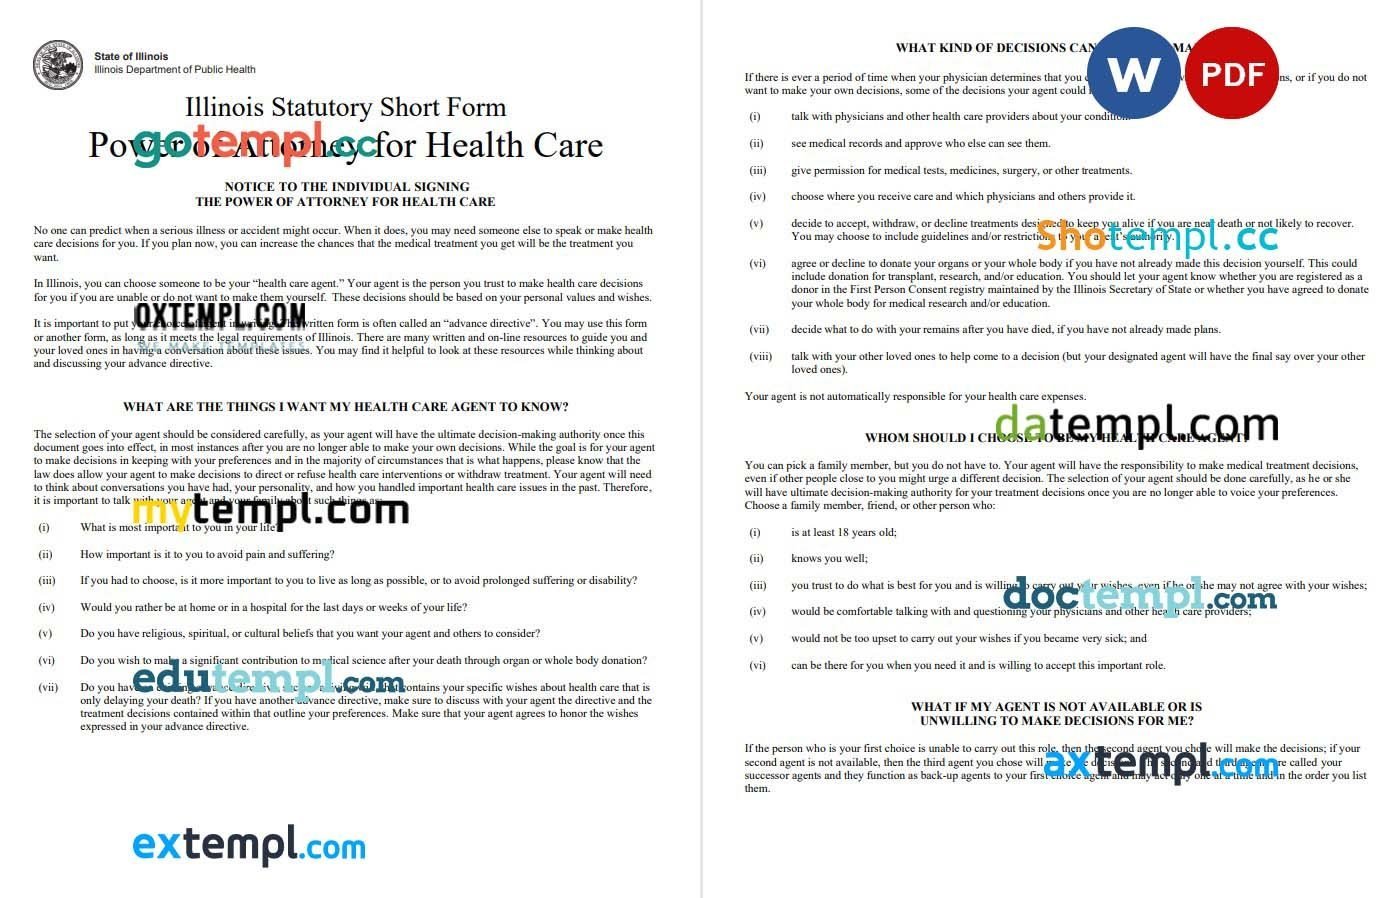 Illinois Gov Power of Attorne for Health Care example, fully editable